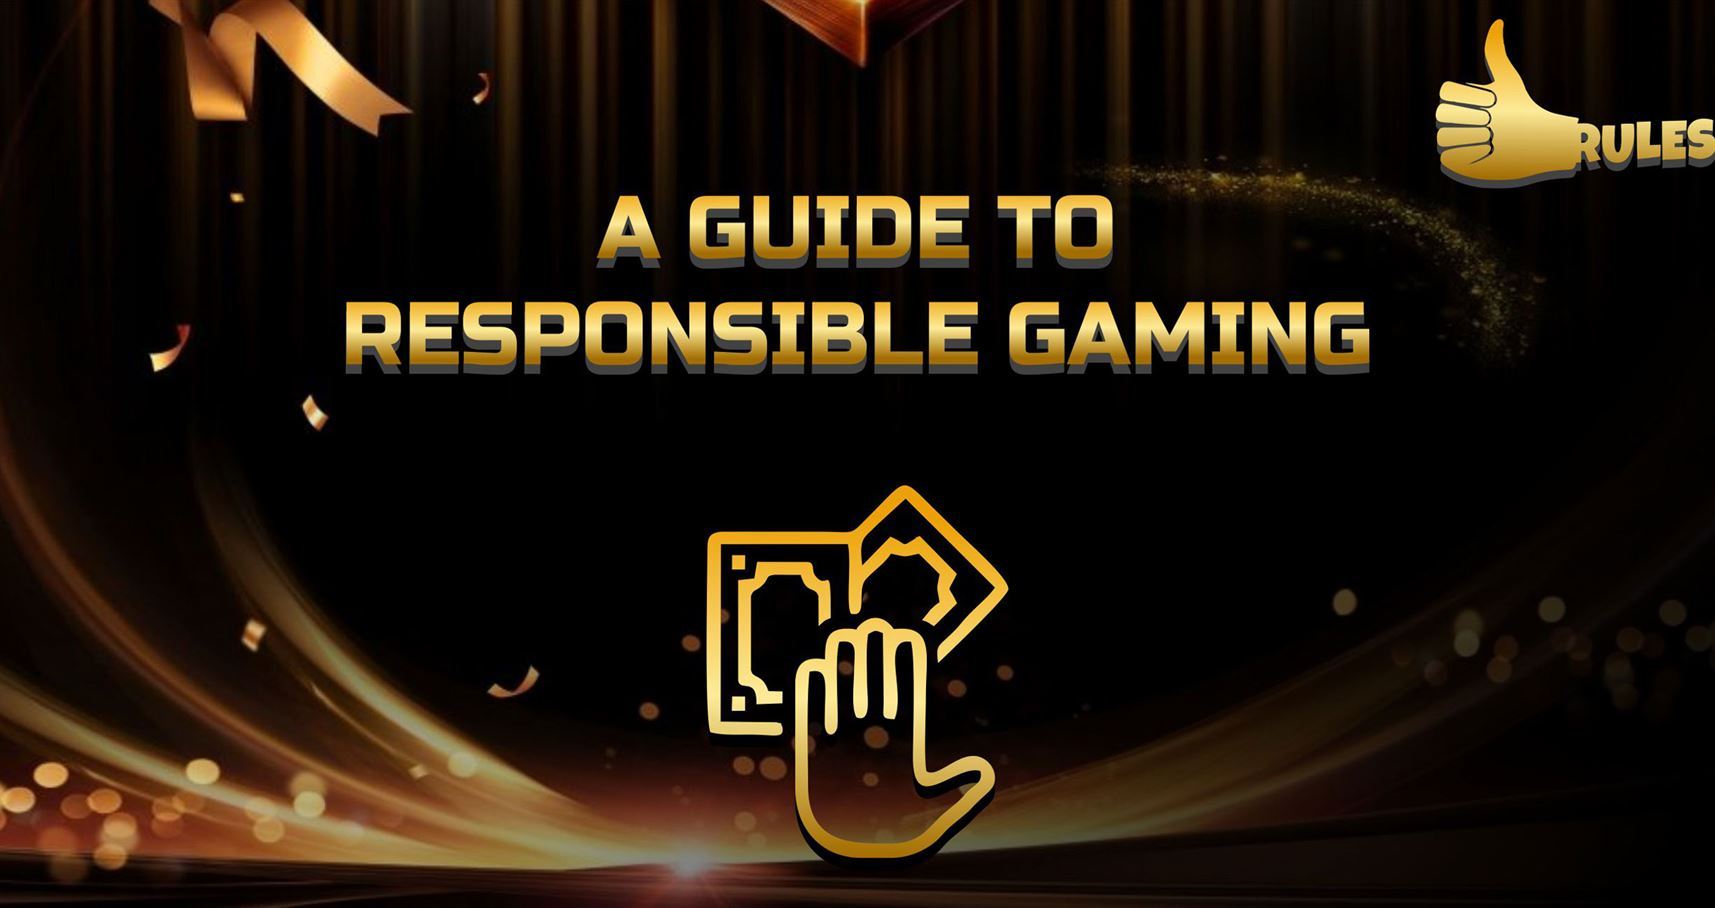 A Guide to Responsible Gaming